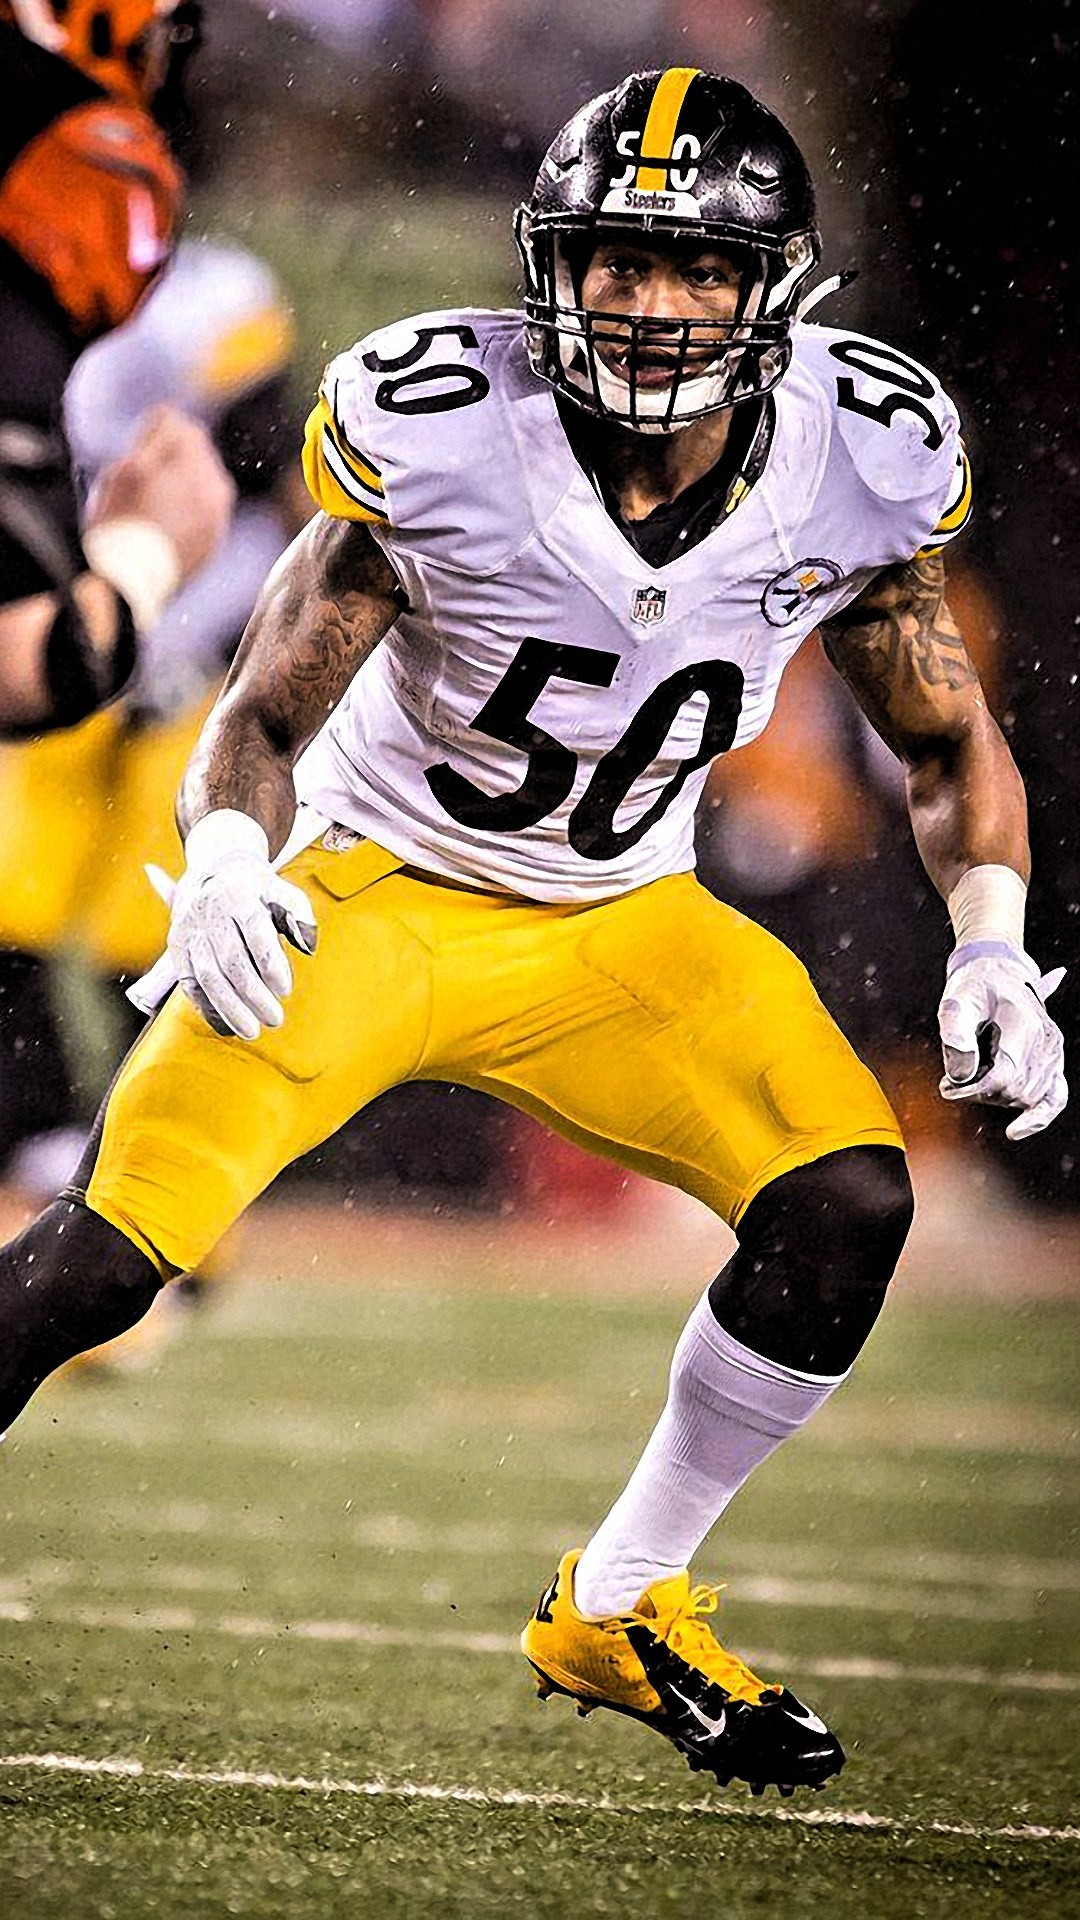 New Steelers Wallpapers For Iphone - Best Steelers Wallpaper For Iphone - HD Wallpaper 